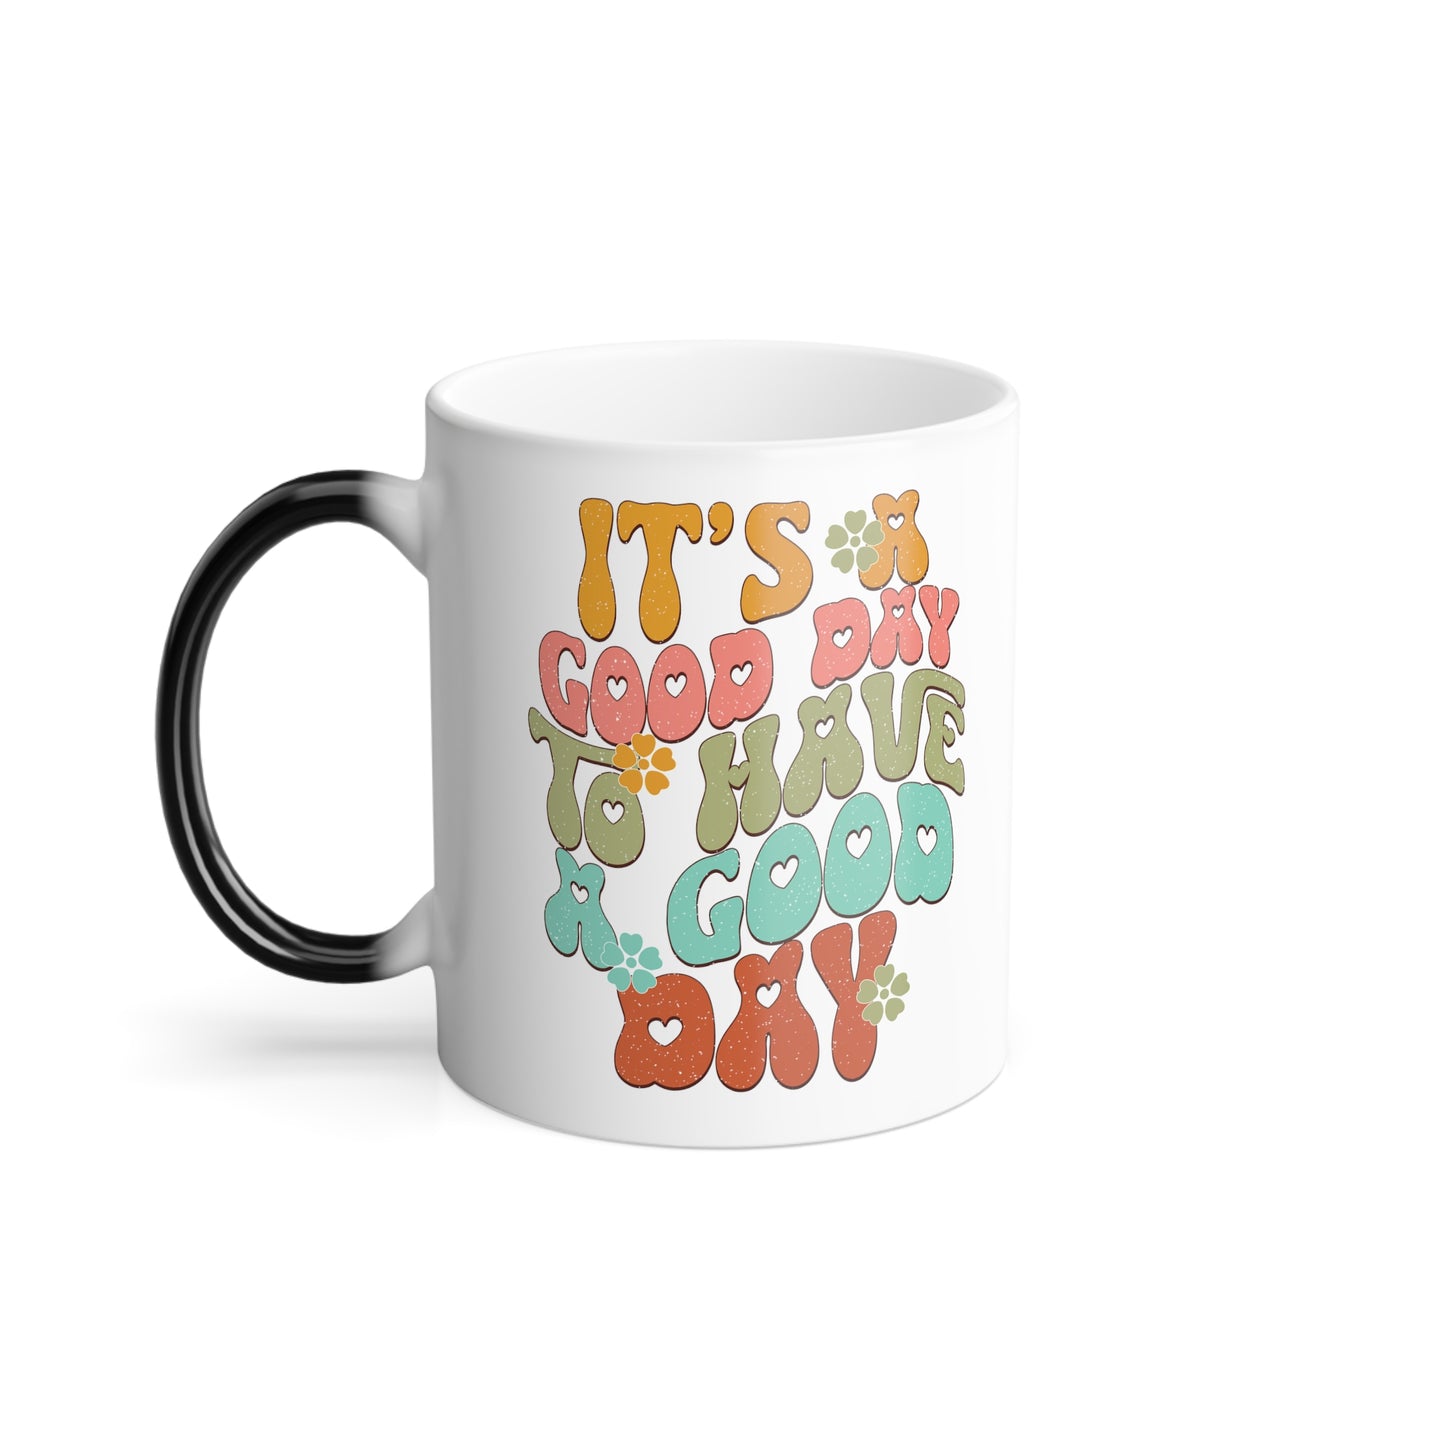 It's a Good Day to Have a Good Day - Color Morphing Mug, 11oz